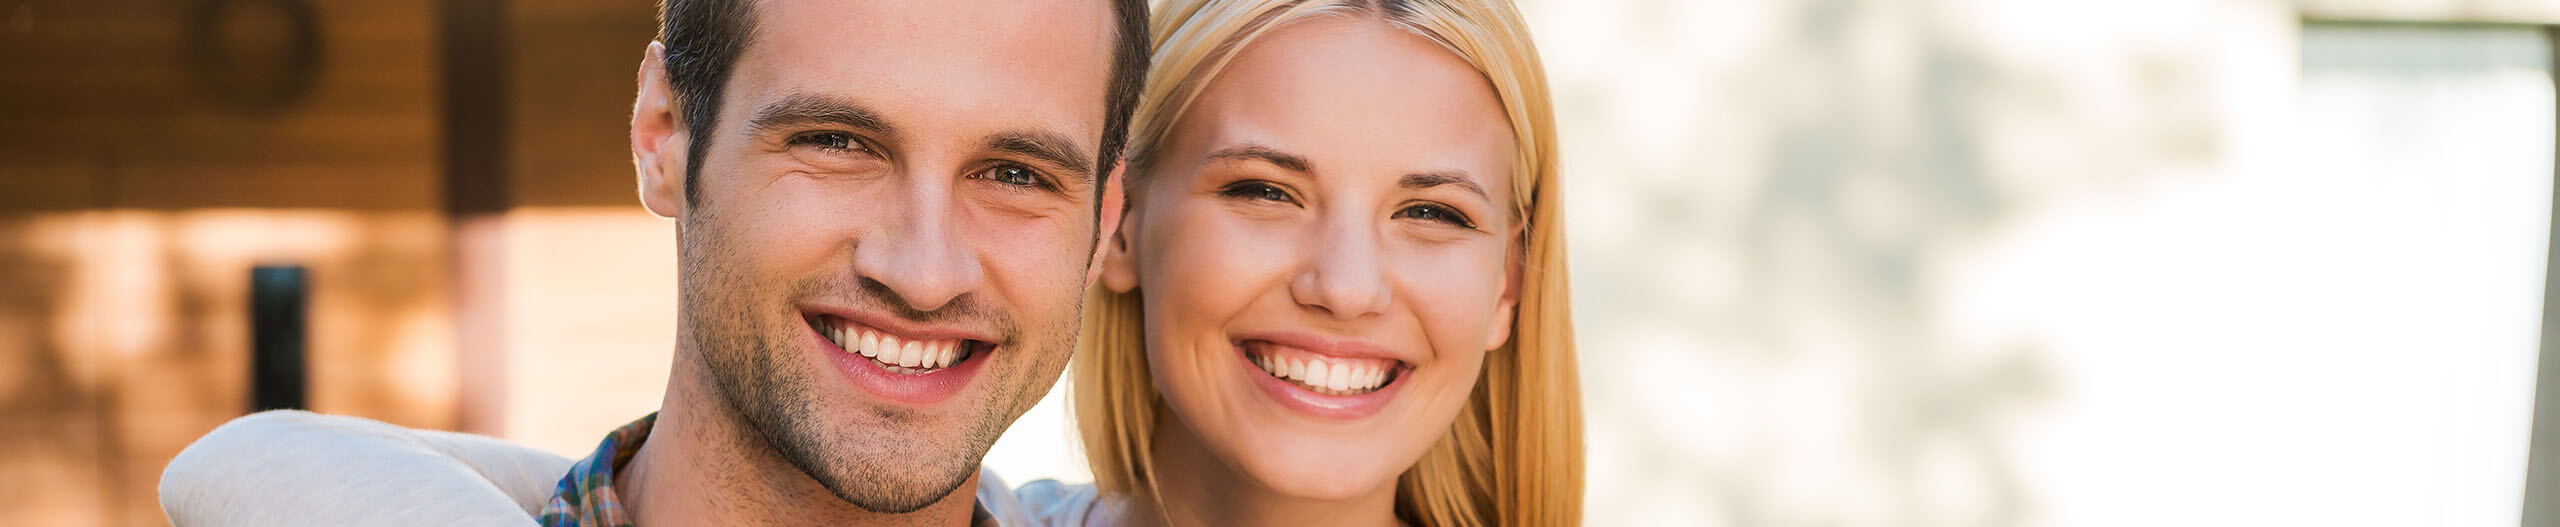 Young man and woman smiling